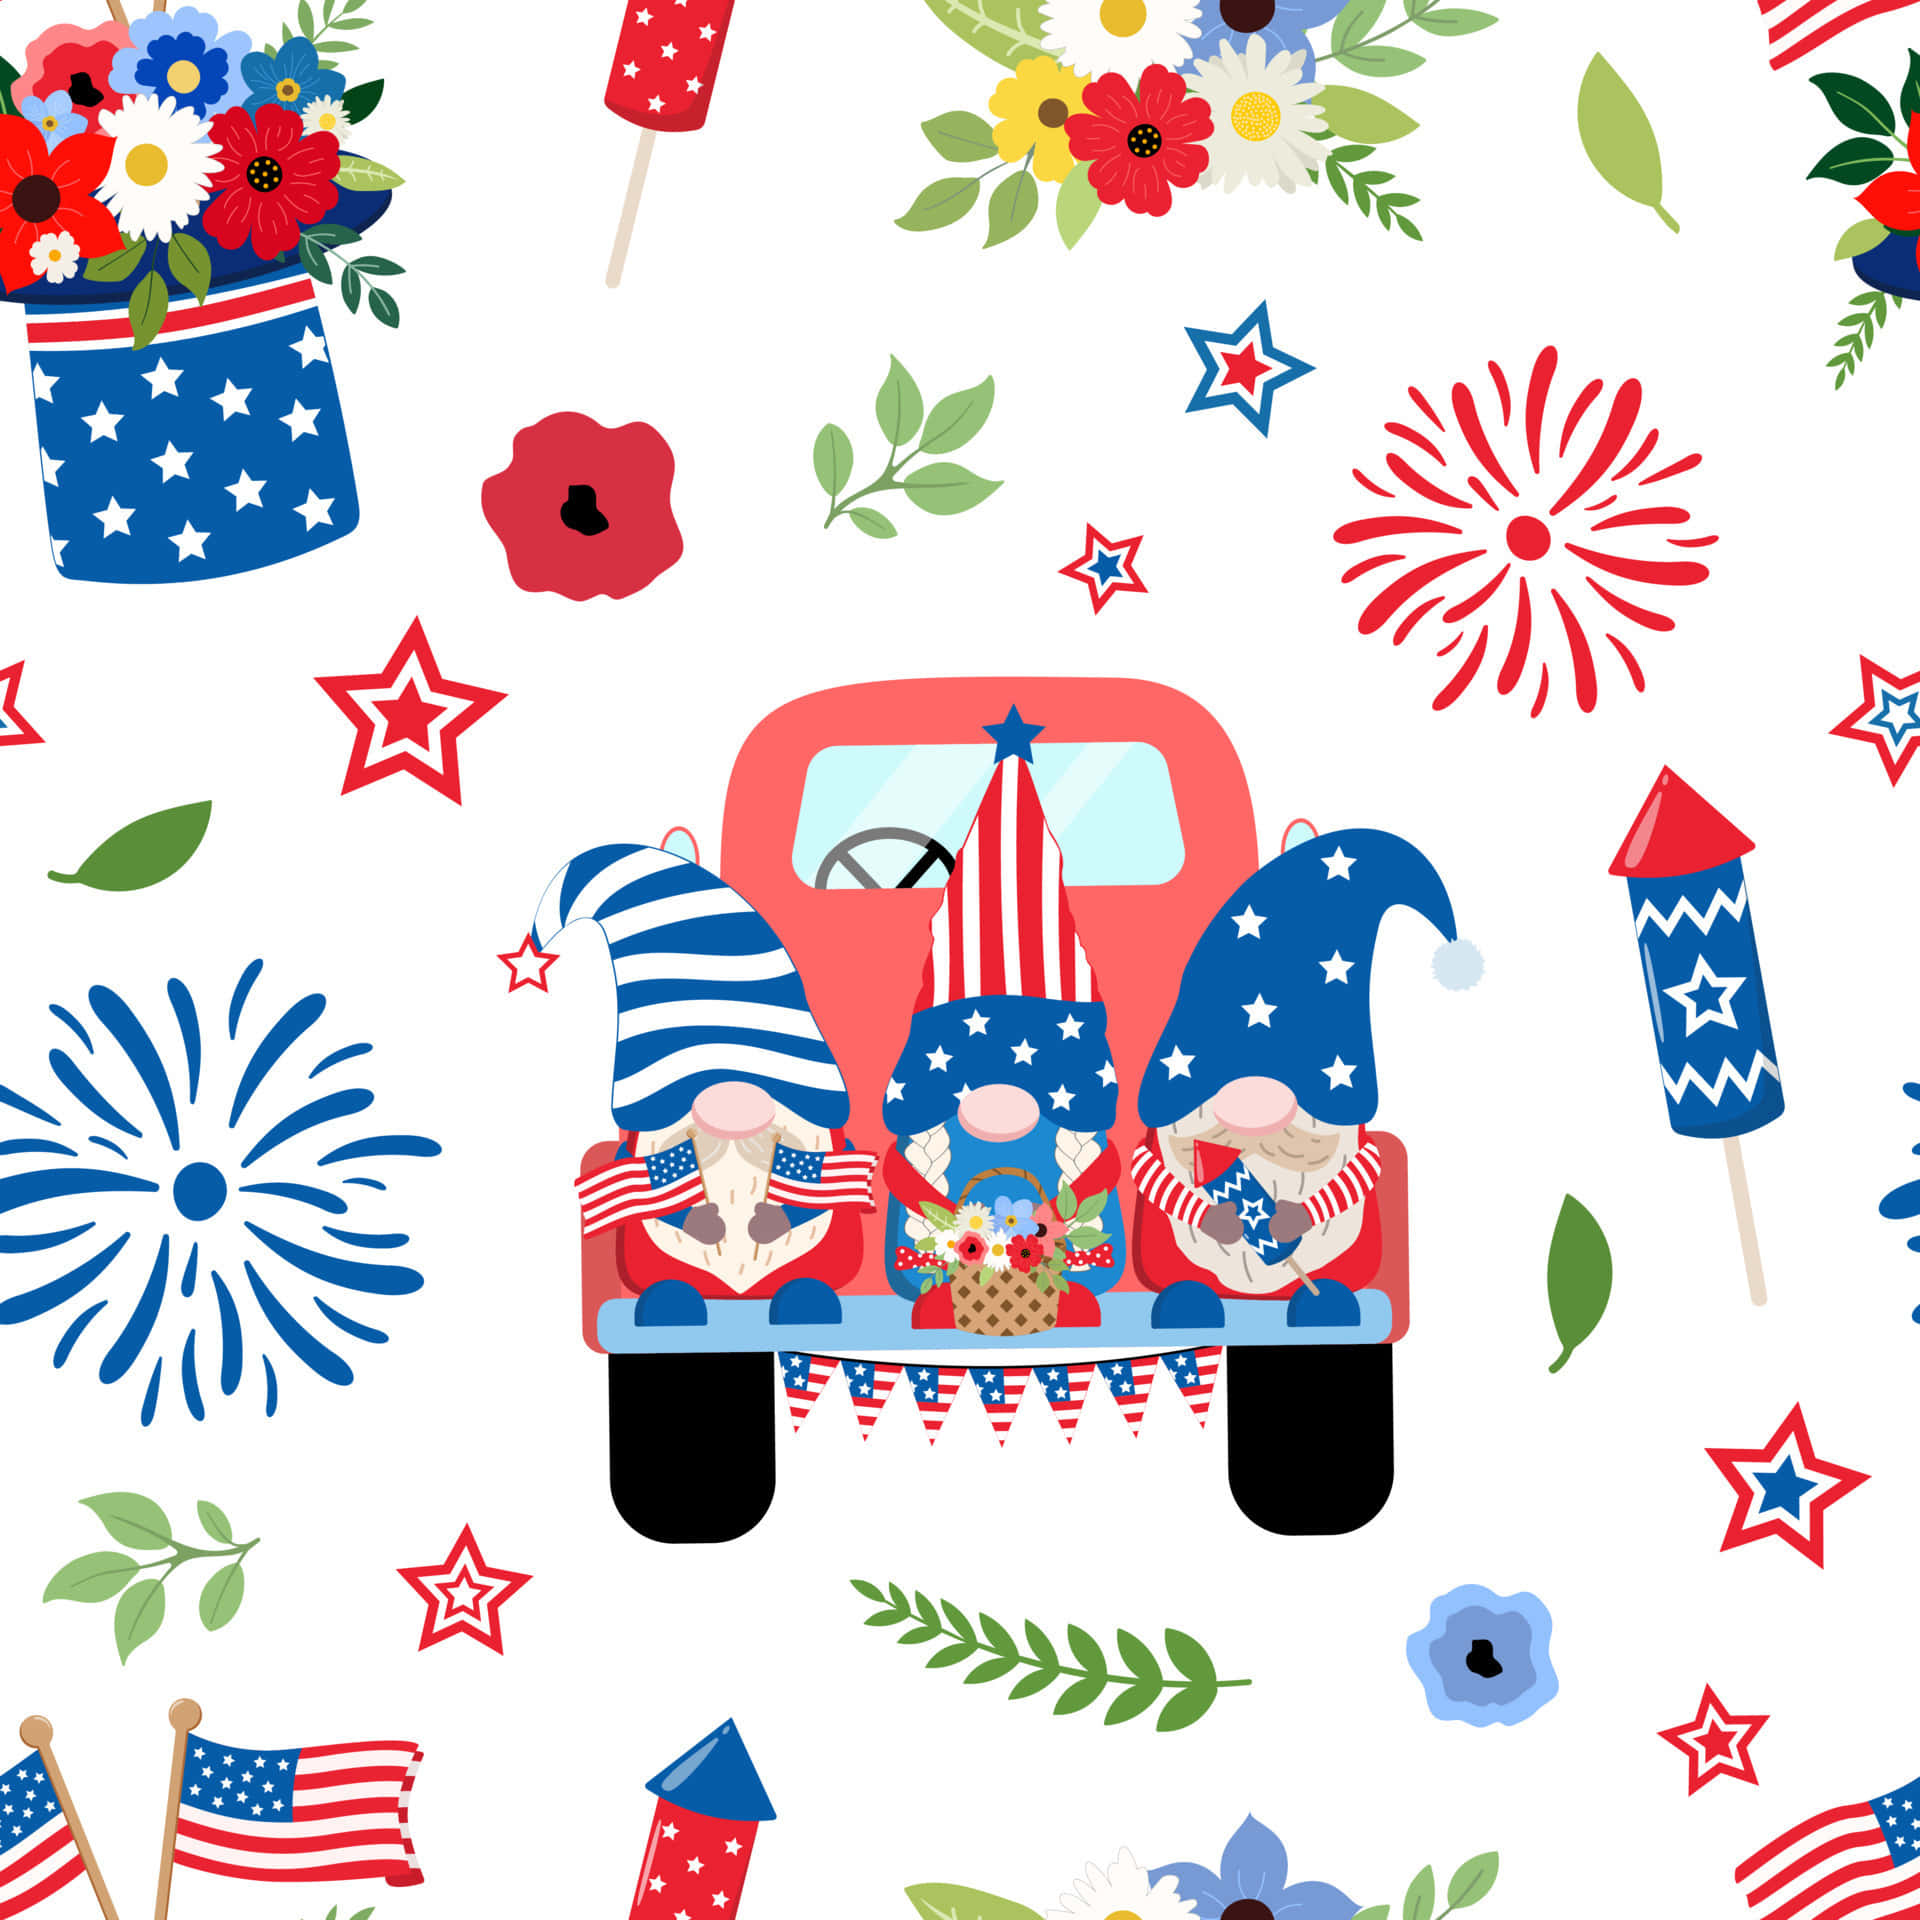 Celebrate the Fourth of July with this Cute Patriotic Background